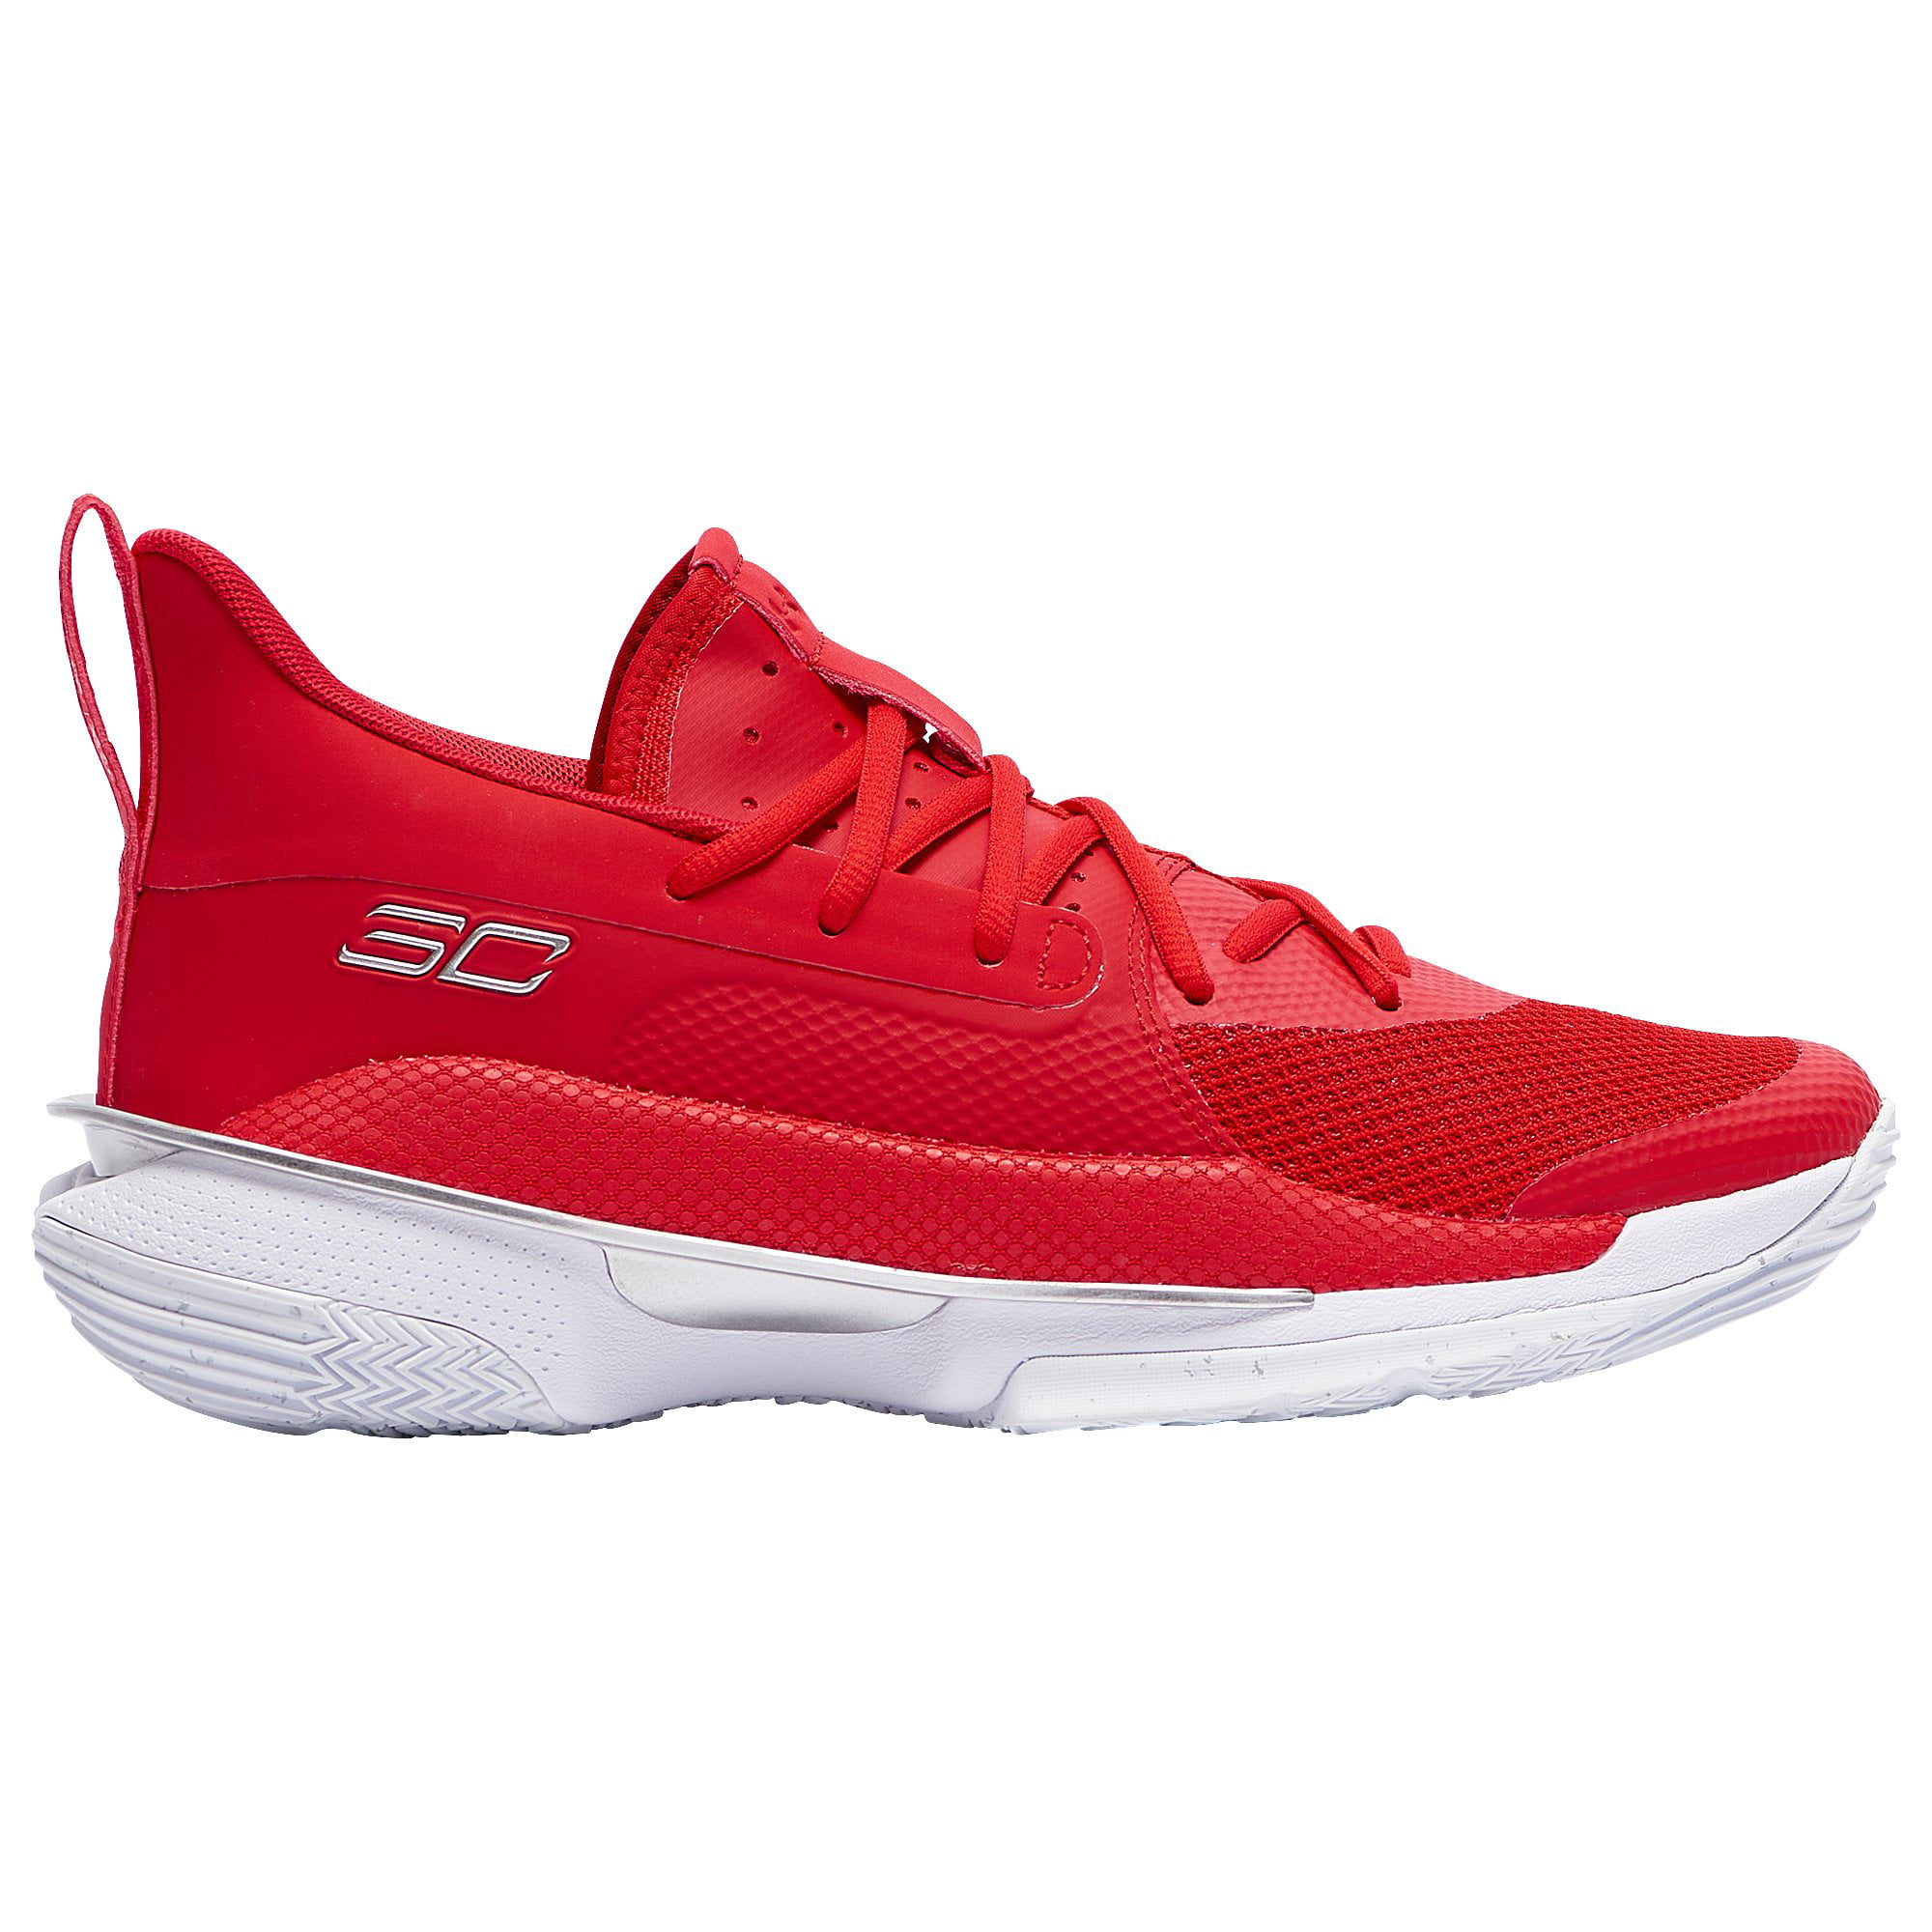 Under Armour Men's Team Curry Basketball Shoes